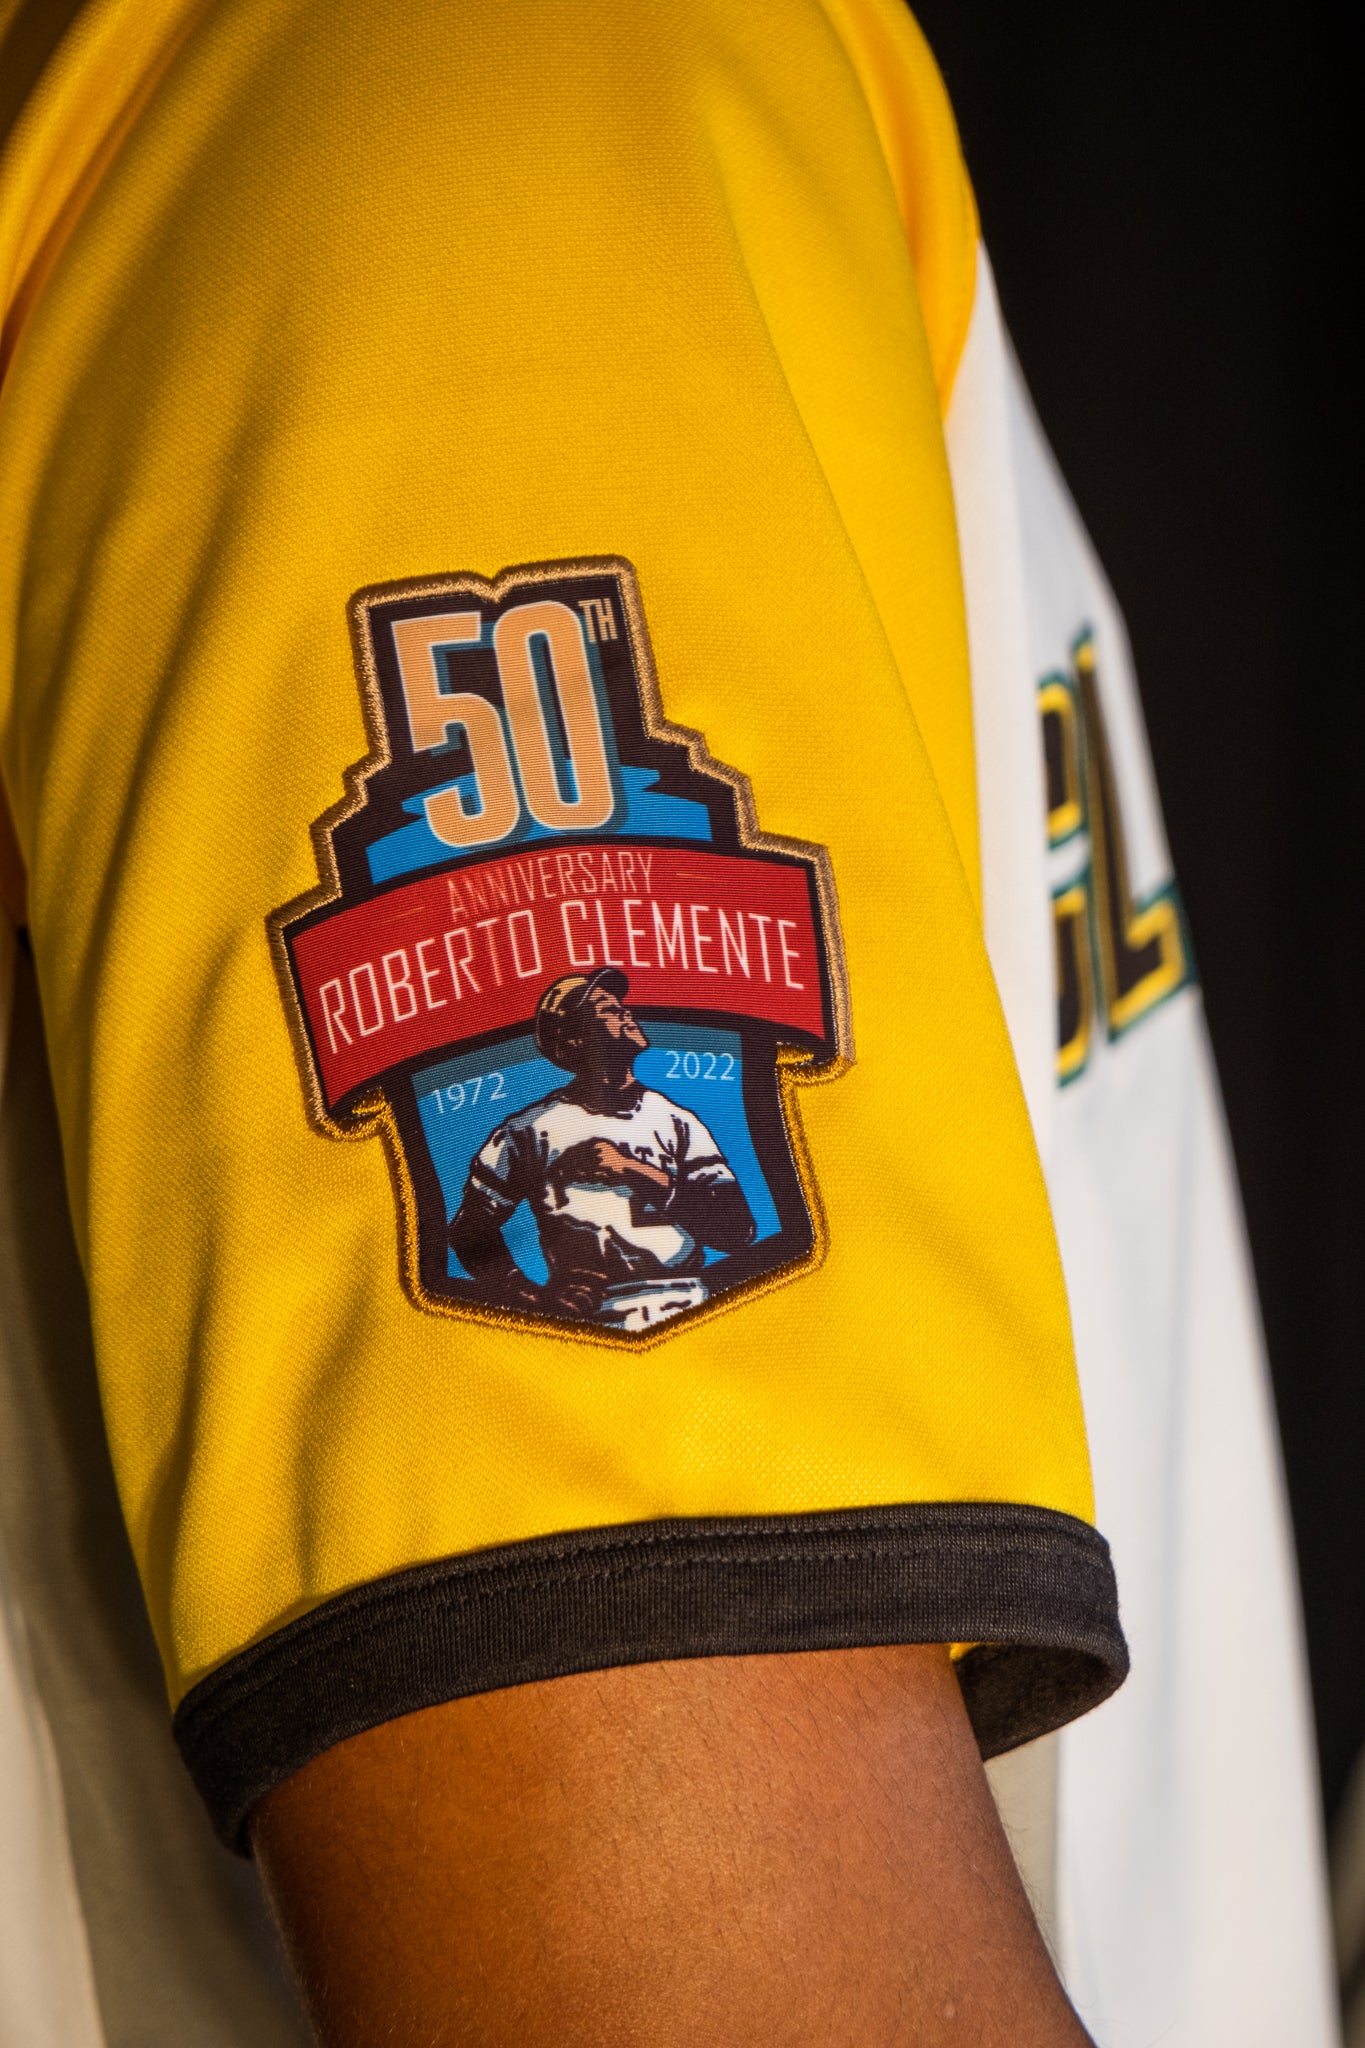 roberto clemente yellow jersey, Off 66%